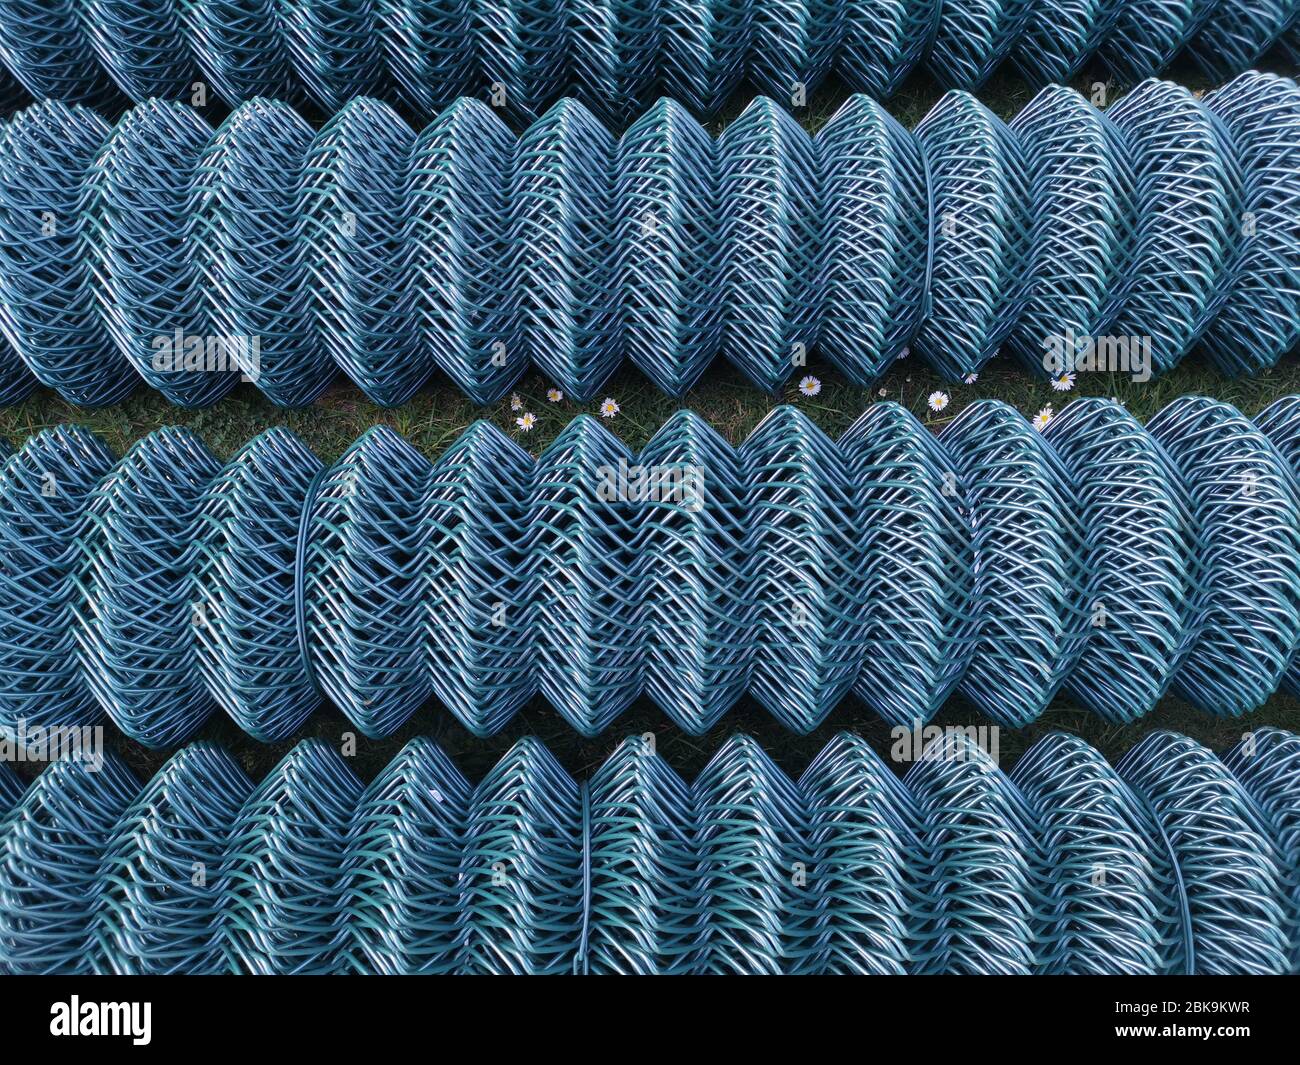 Coils of chain link fencing on lawn with daisies visible in-between Stock Photo